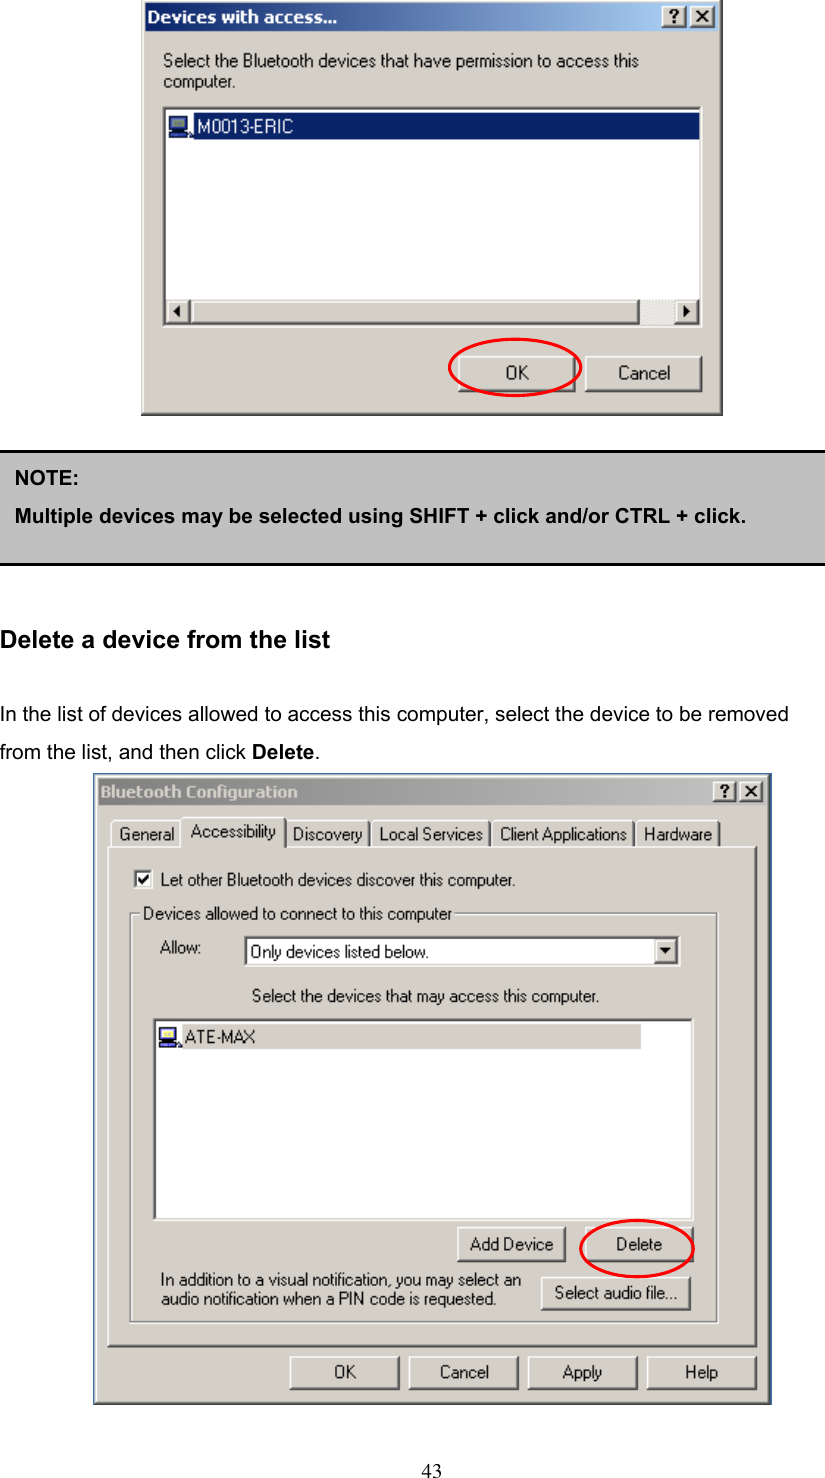       Delete a device from the list  In the list of devices allowed to access this computer, select the device to be removed from the list, and then click Delete.  NOTE:  Multiple devices may be selected using SHIFT + click and/or CTRL + click.  43 